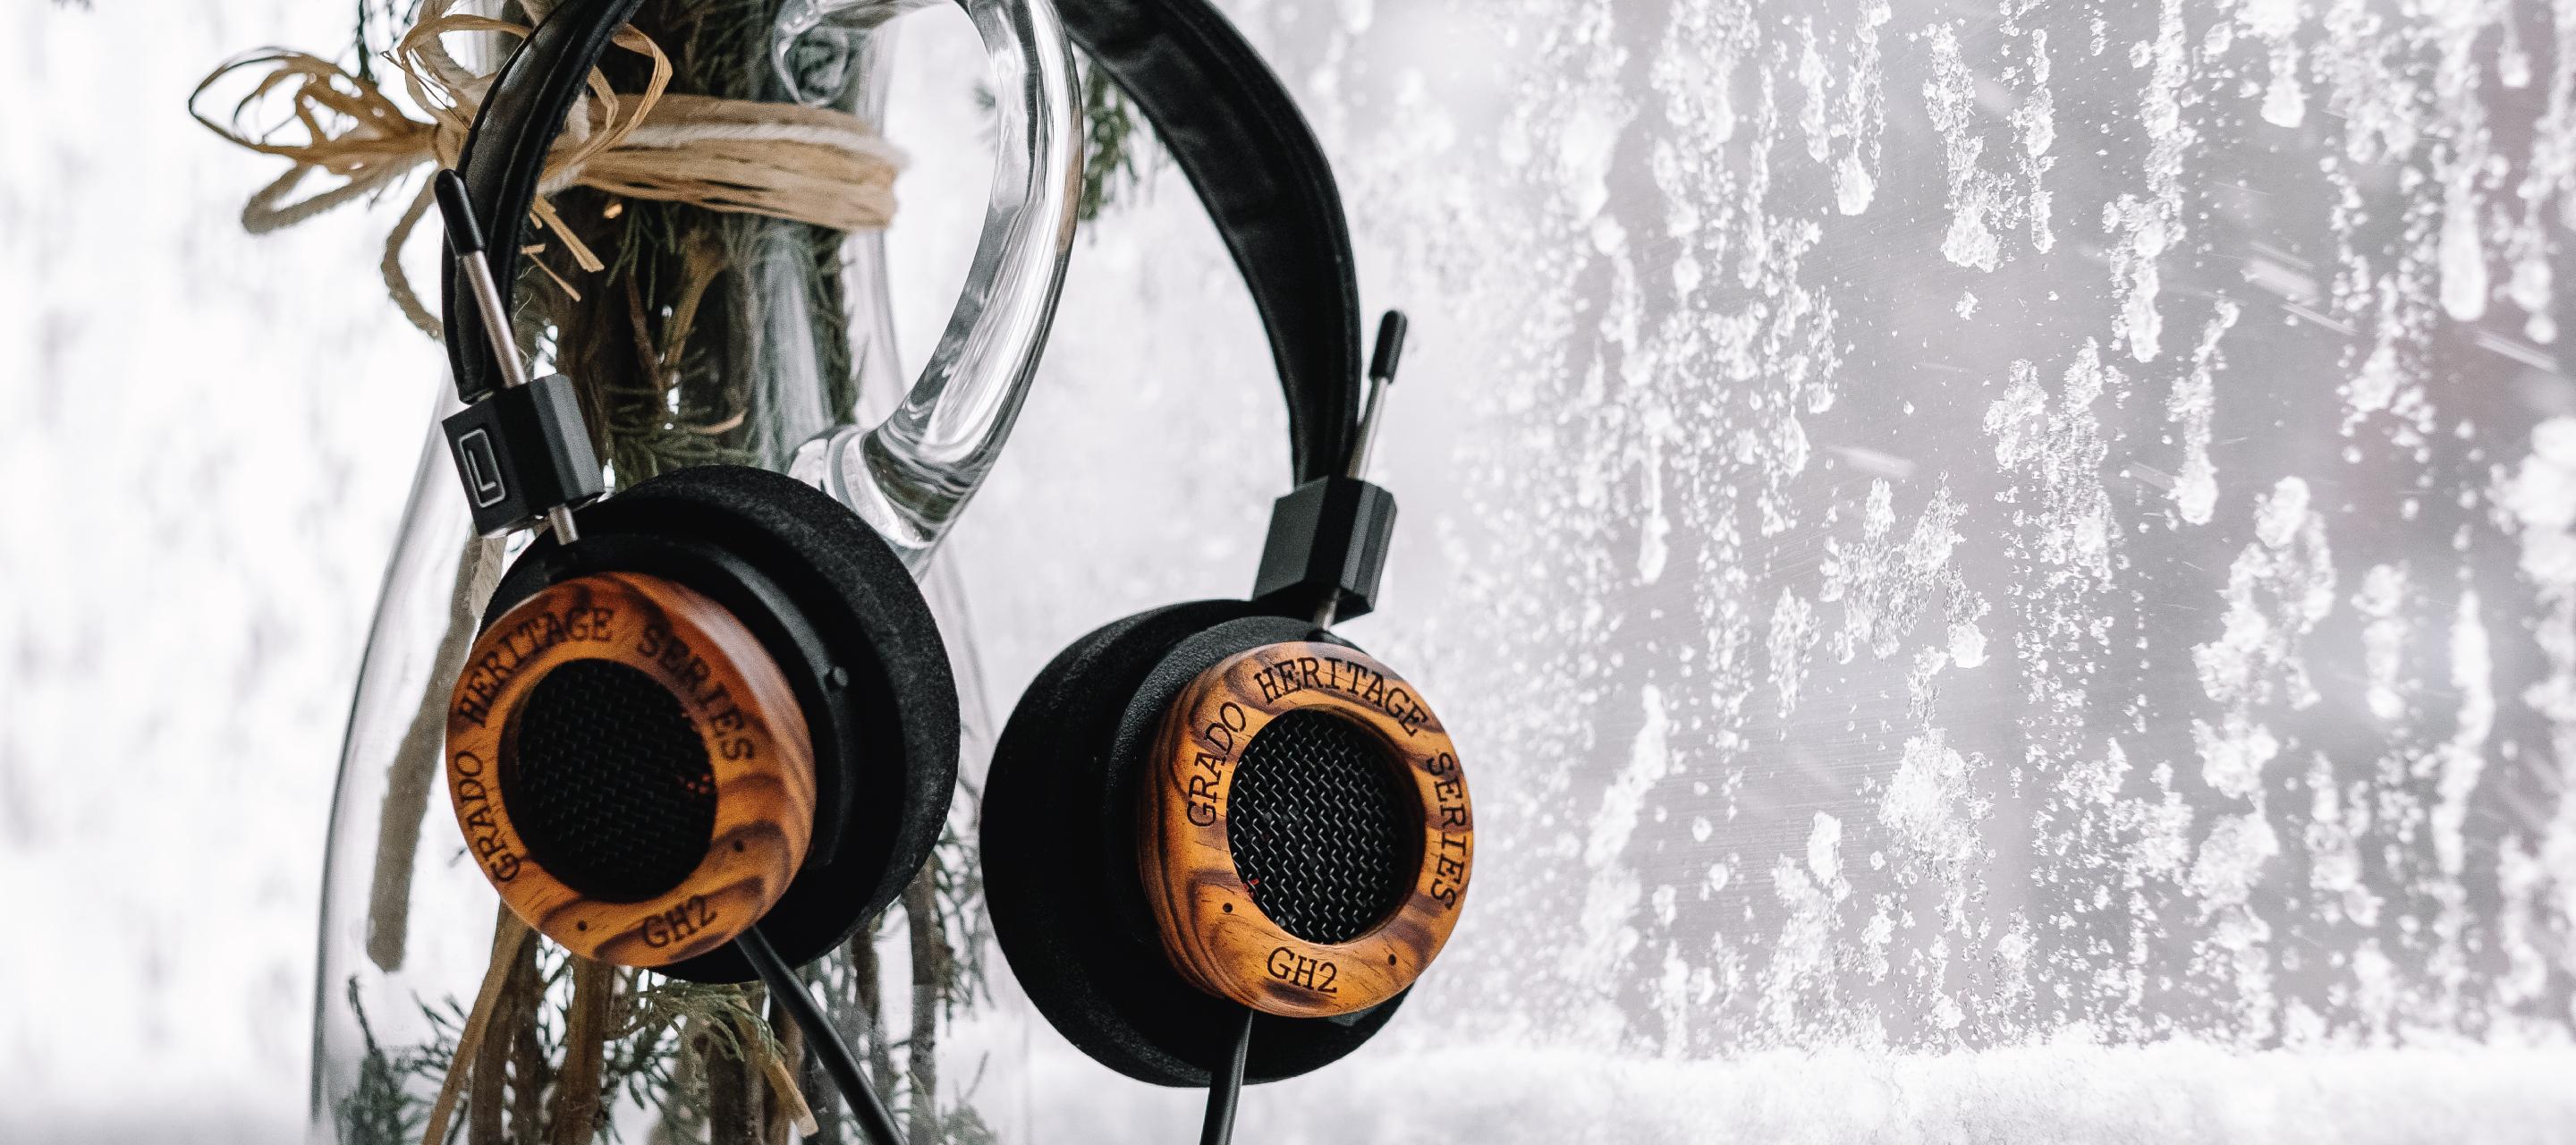 Grado Labs GH2 Limited Edition Headphone with cocobolo wood backing